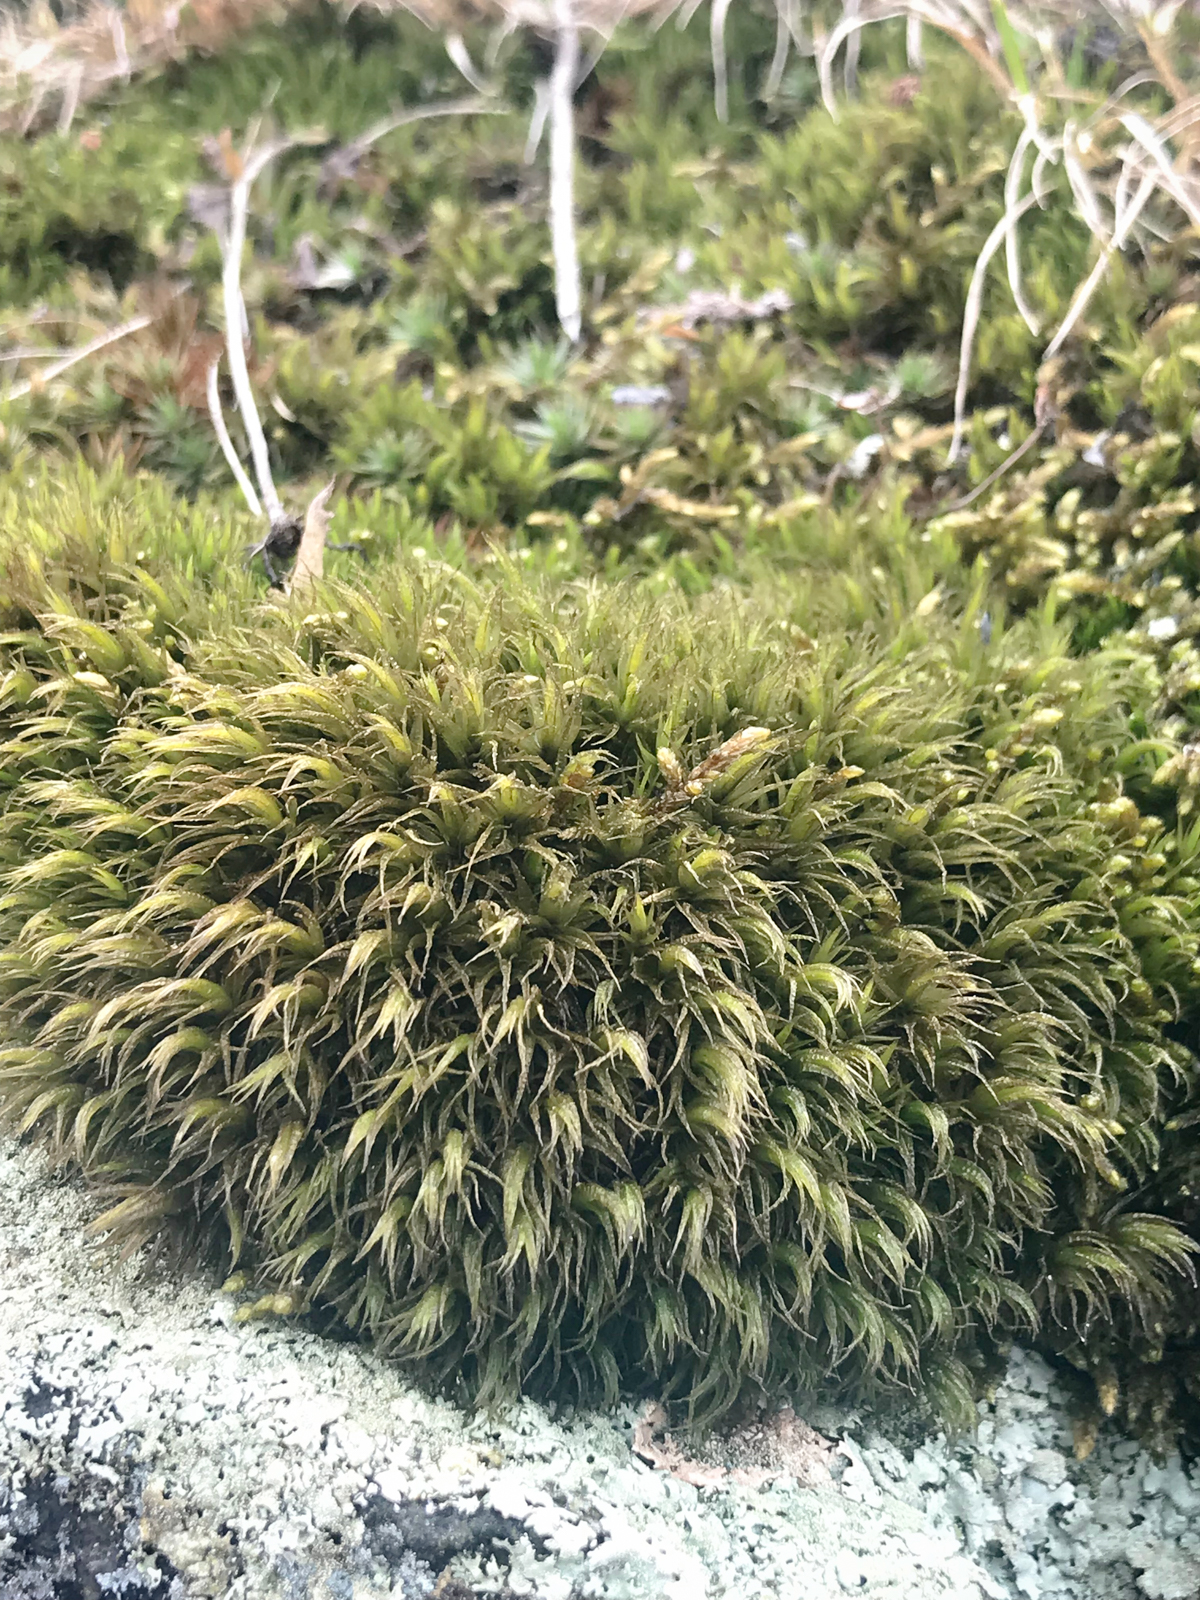 Magical Moss - Winter's Ending in New Hampshire - from The Magic Onions